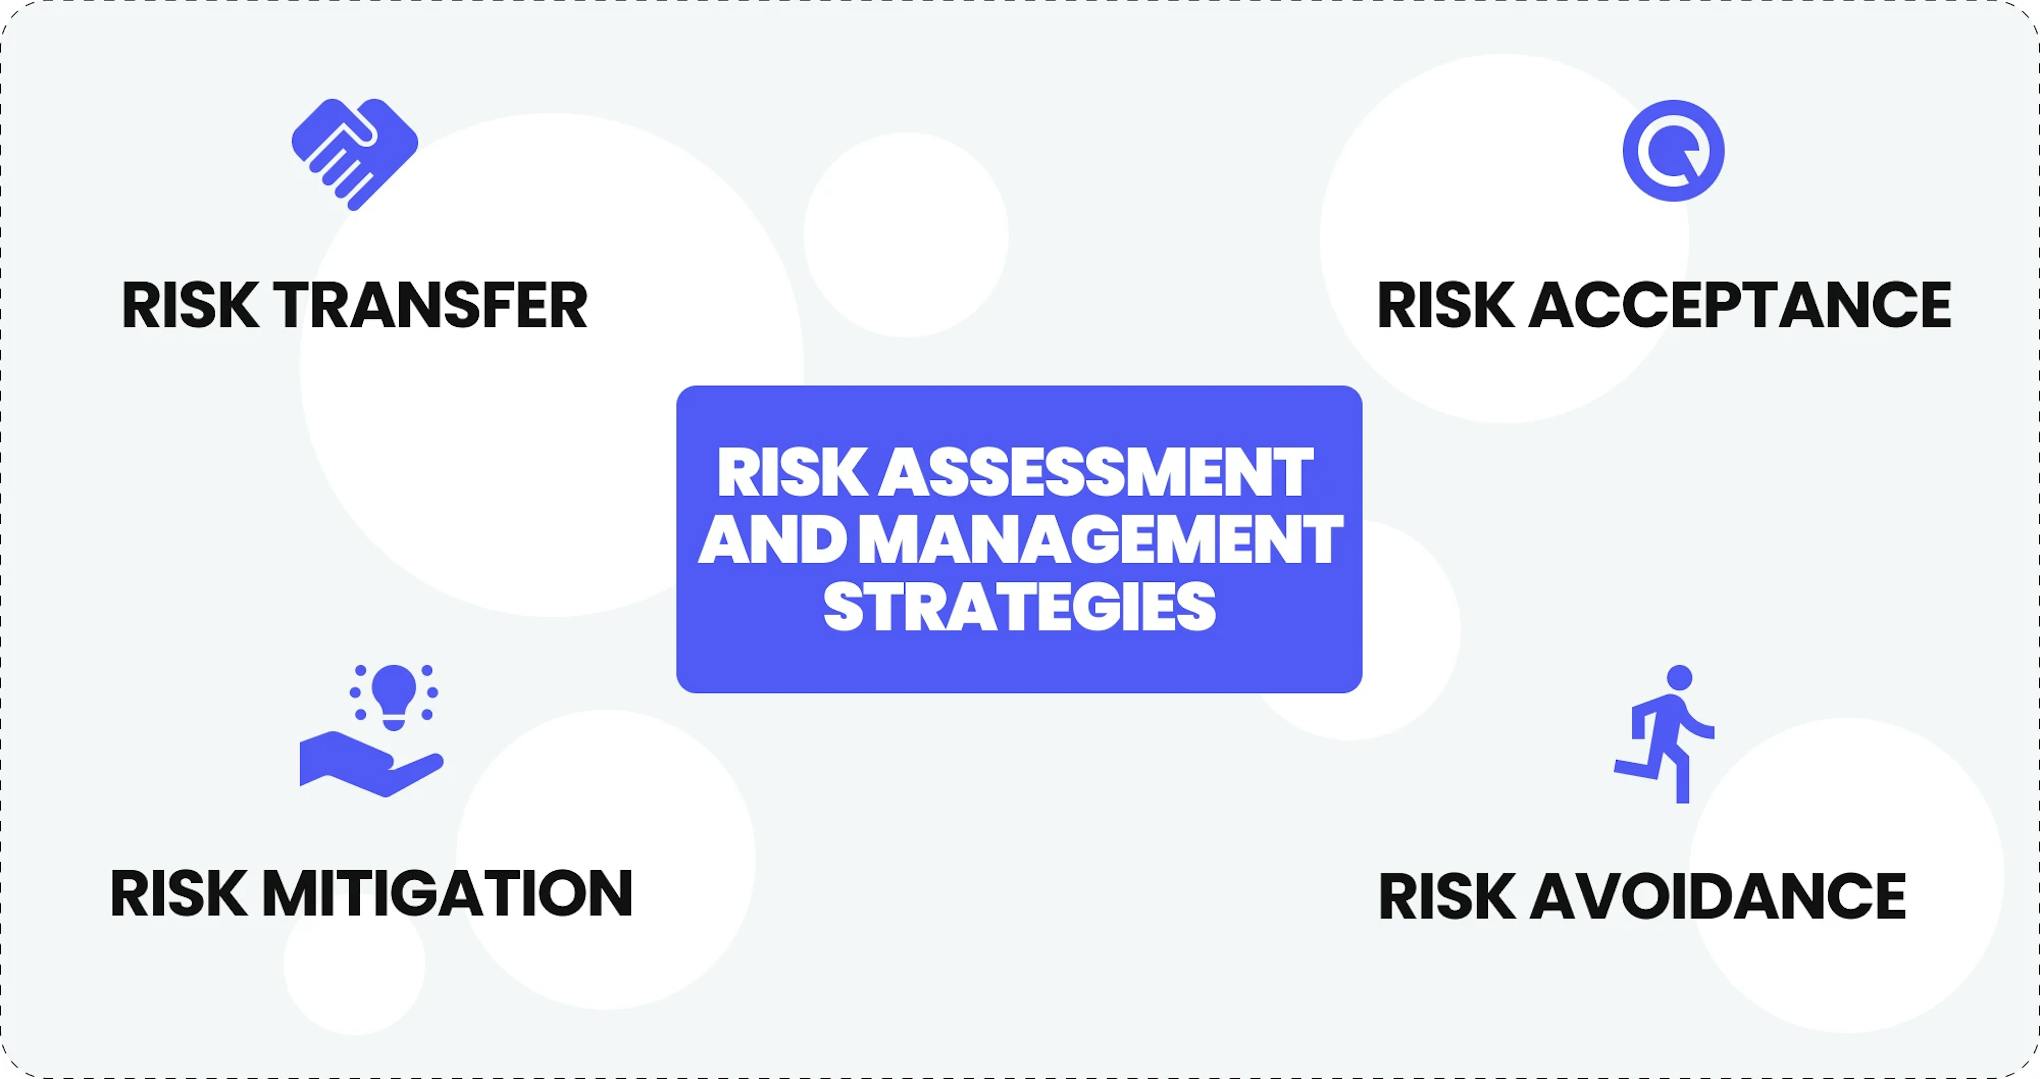 Risk assessment and management strategies